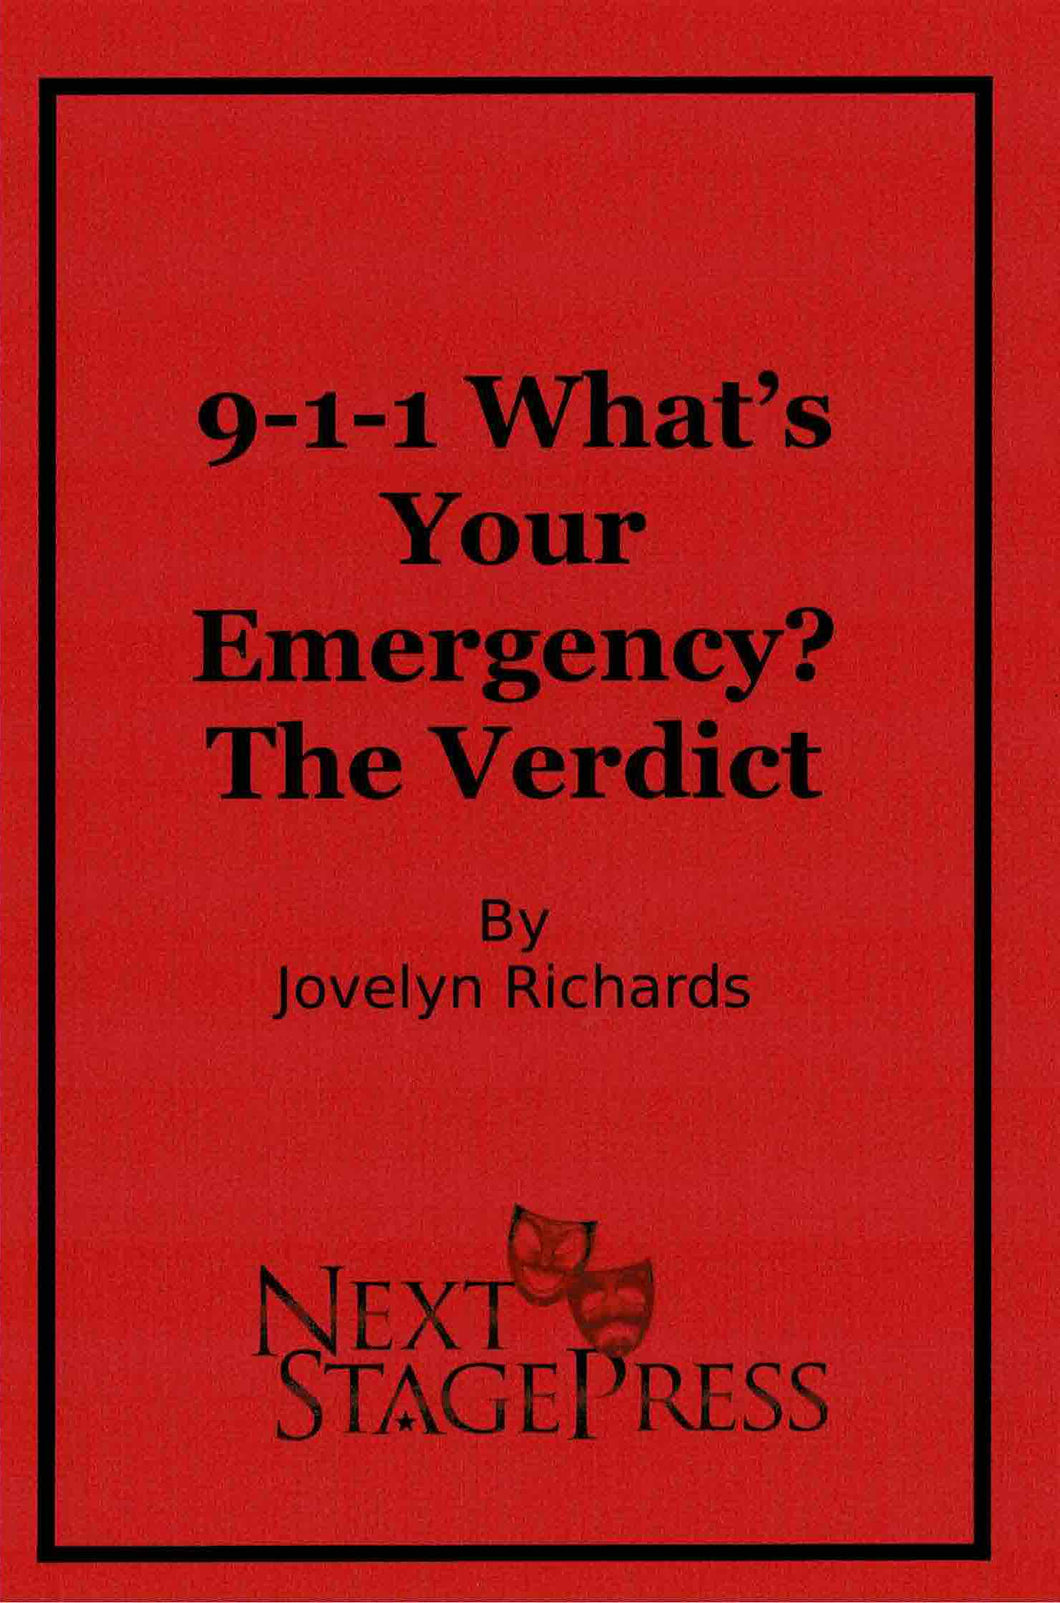 9-1-1 What's Your Emergency? The Verdict